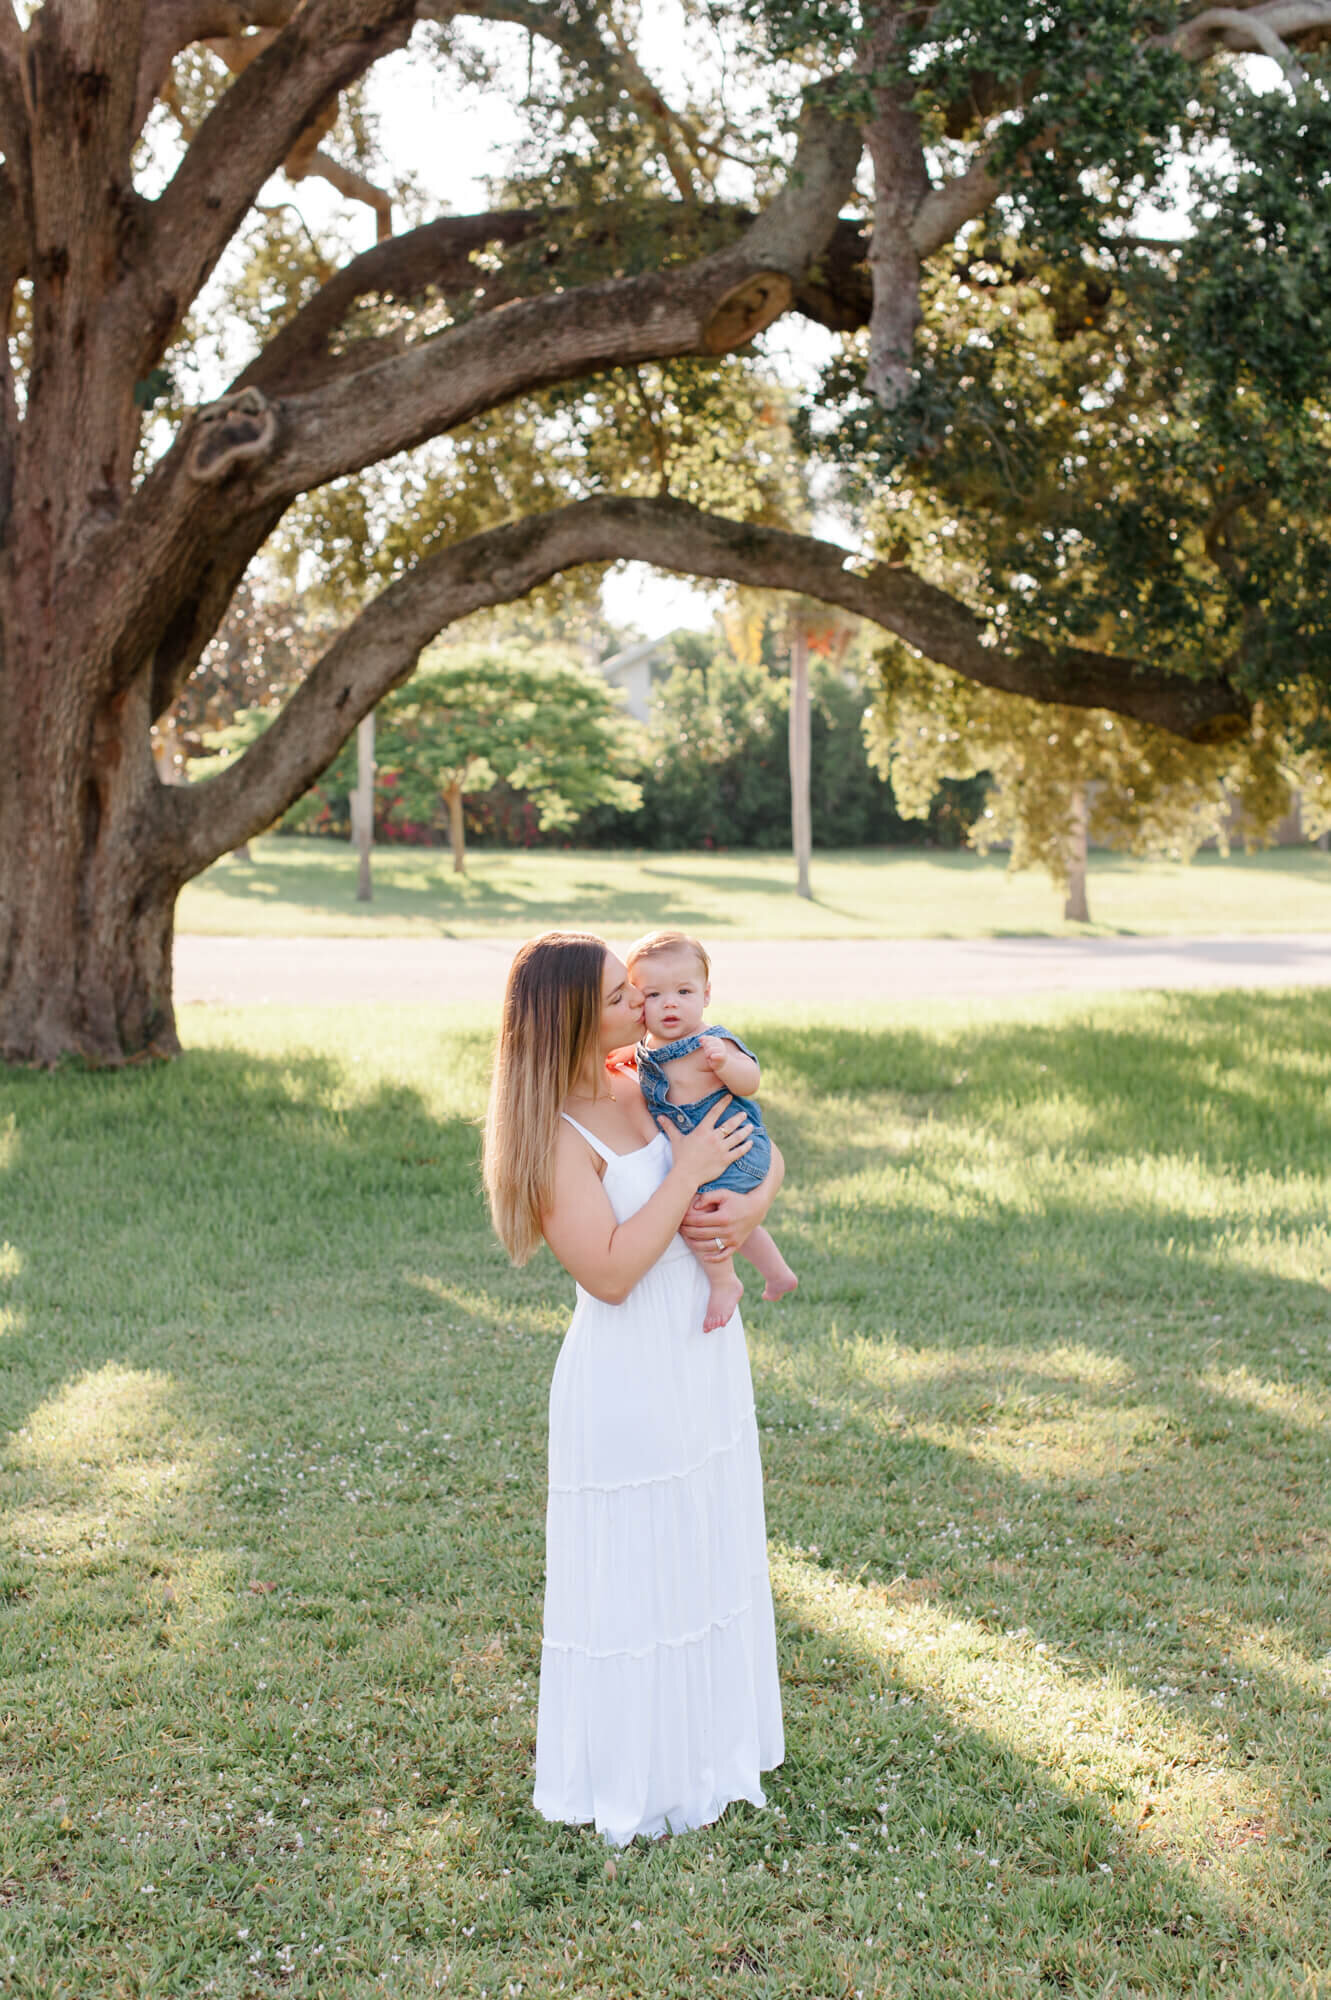 Mom holding son underneath a beautiful oak tree giving him kisses